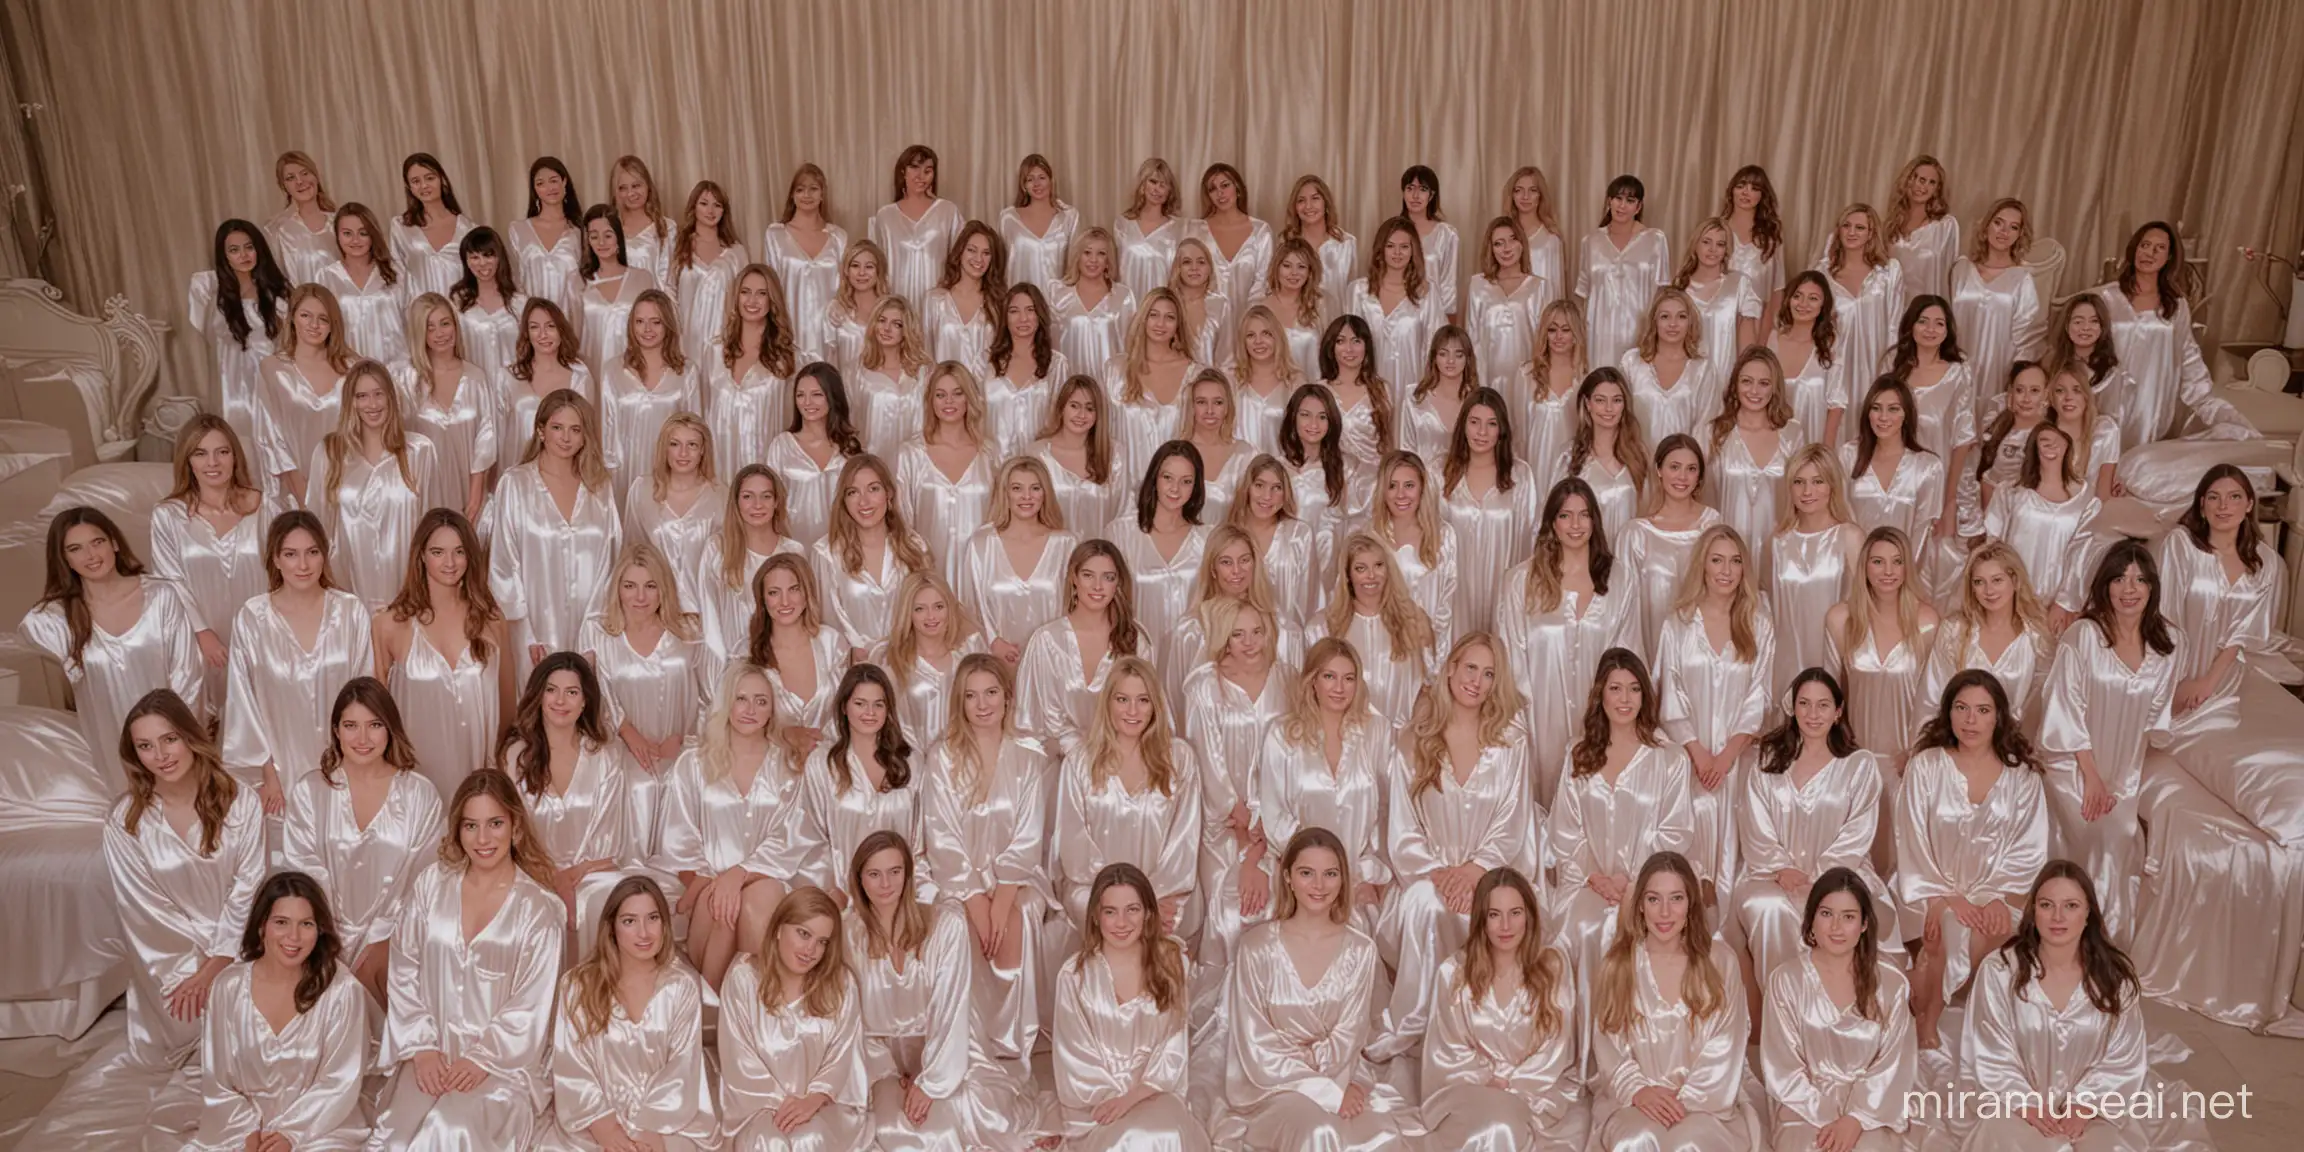 100 women in  milky satin nightgowns stand in 10 rows on a giant satin bed and look at you